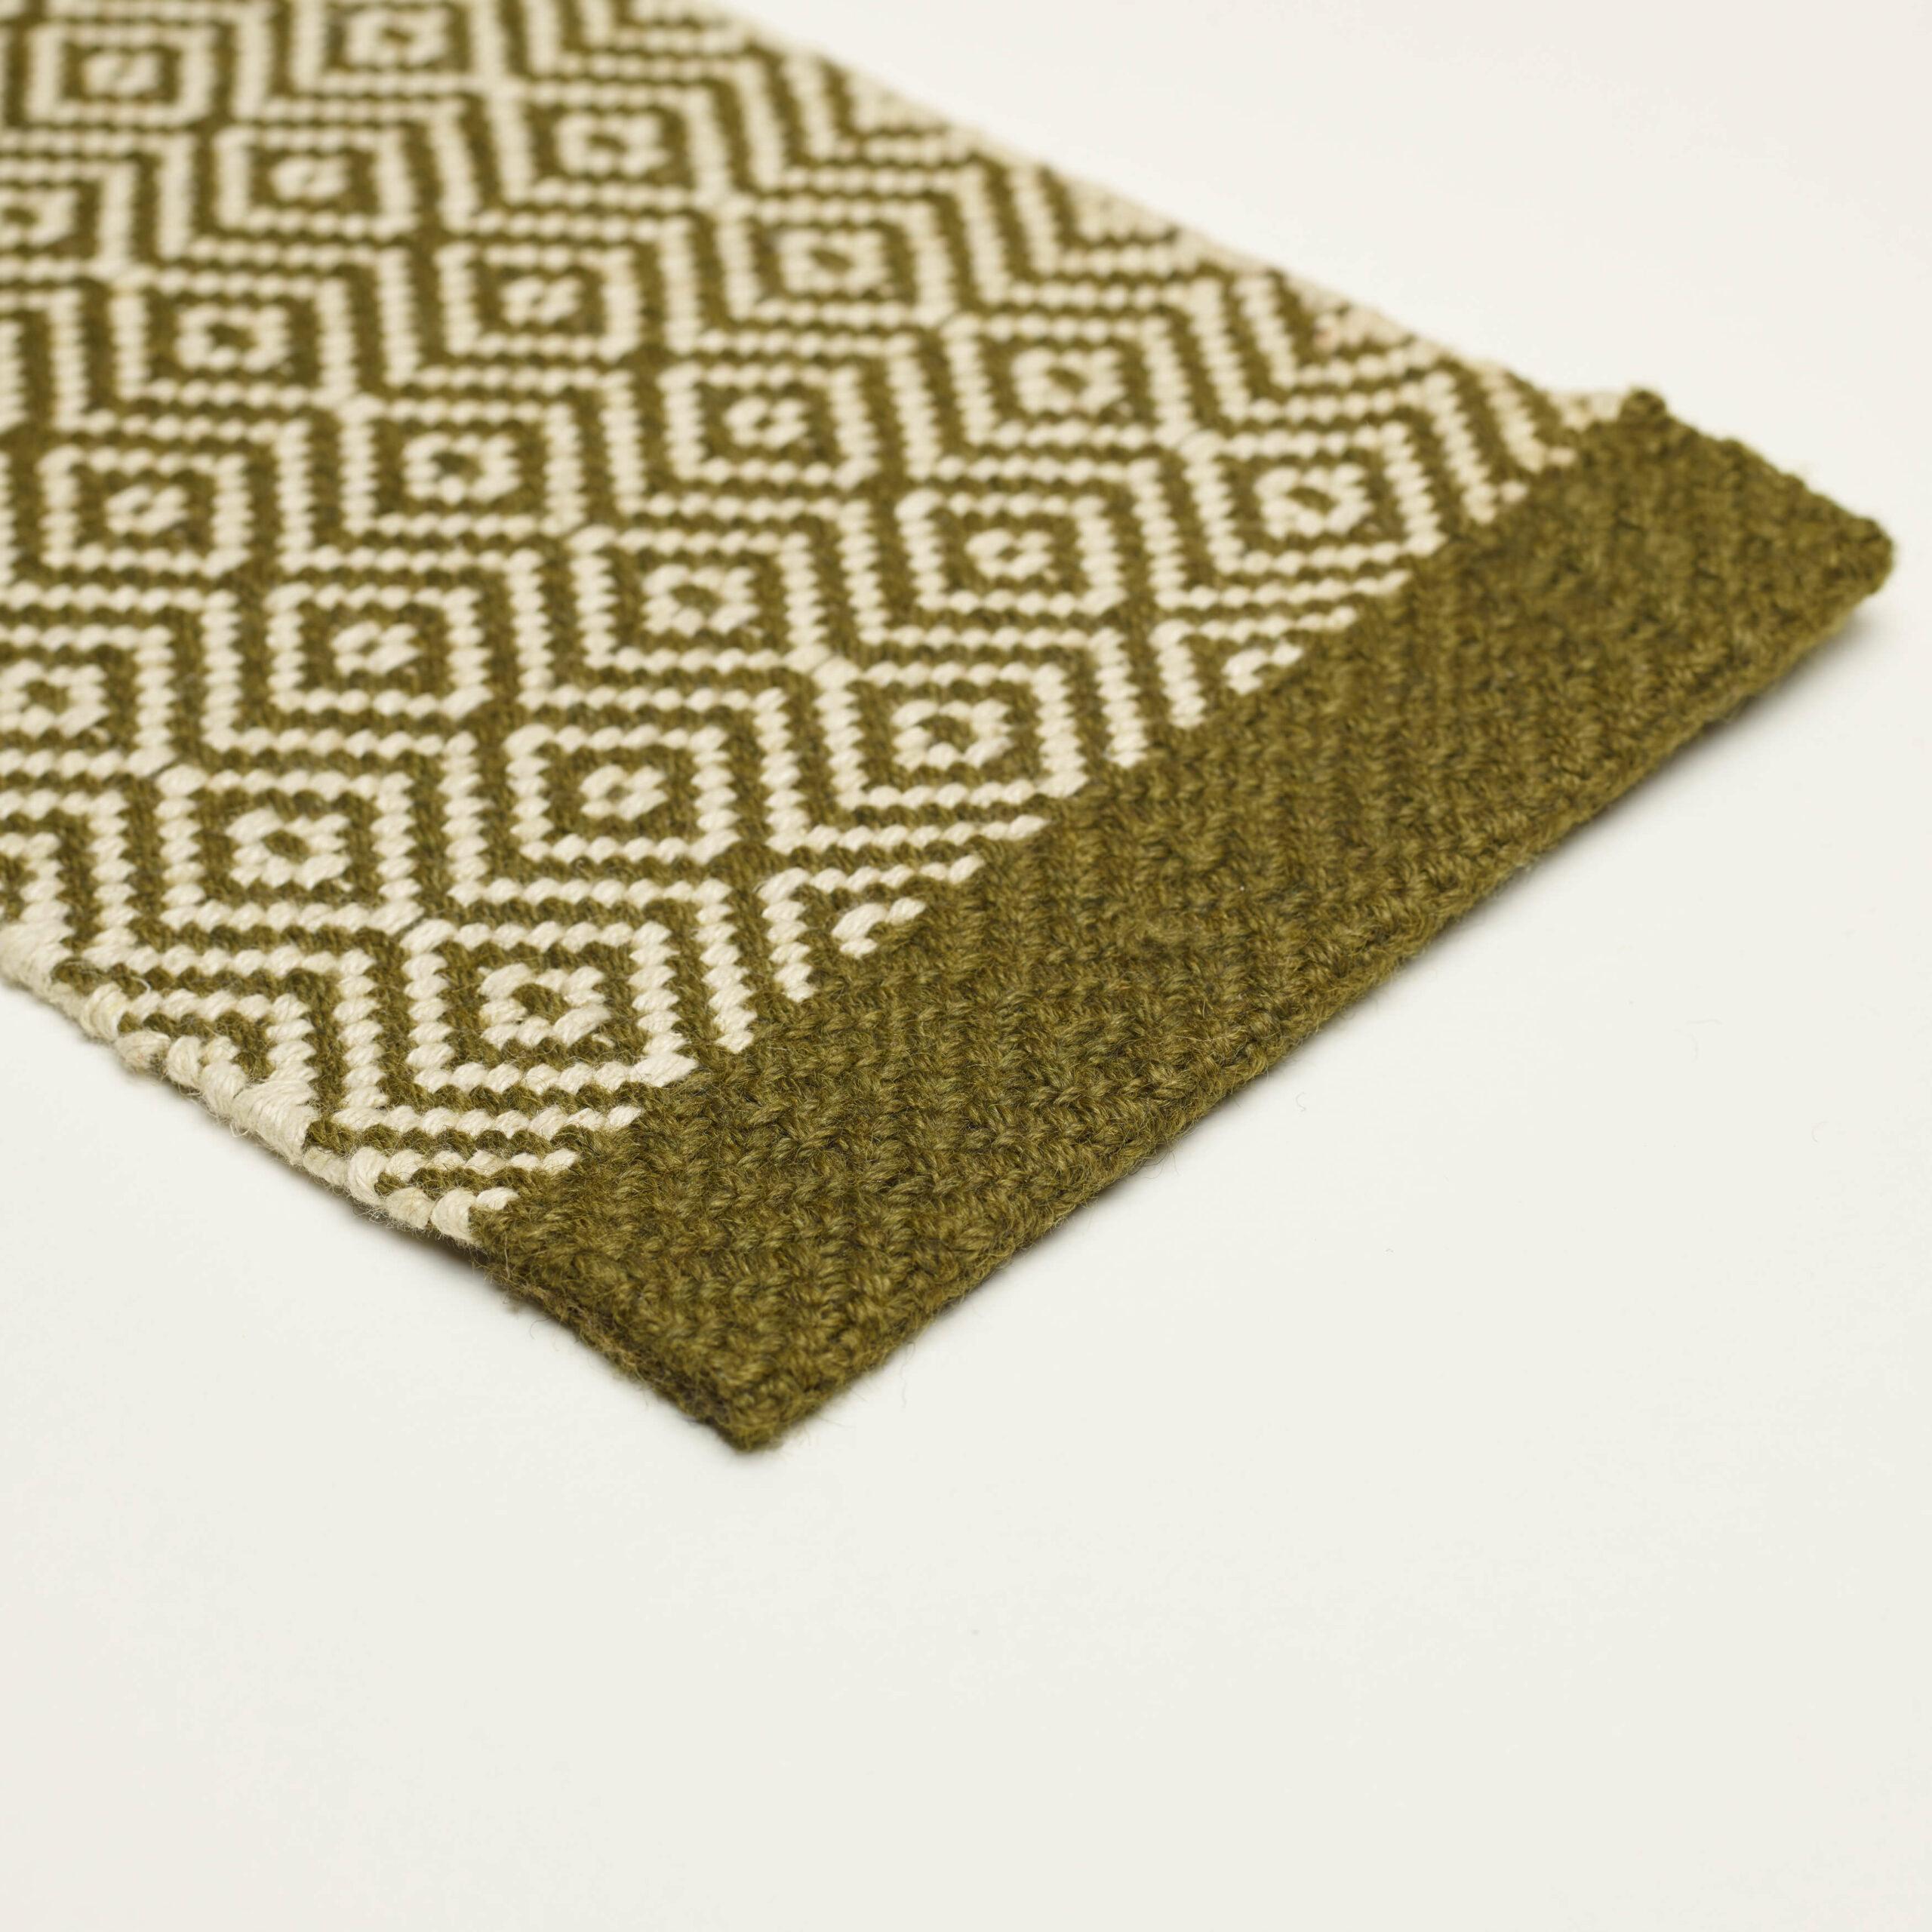 Top end folded finishing - BOMAT | Belgian Luxury Rugs, Carpeted Floors and Stairway Runners